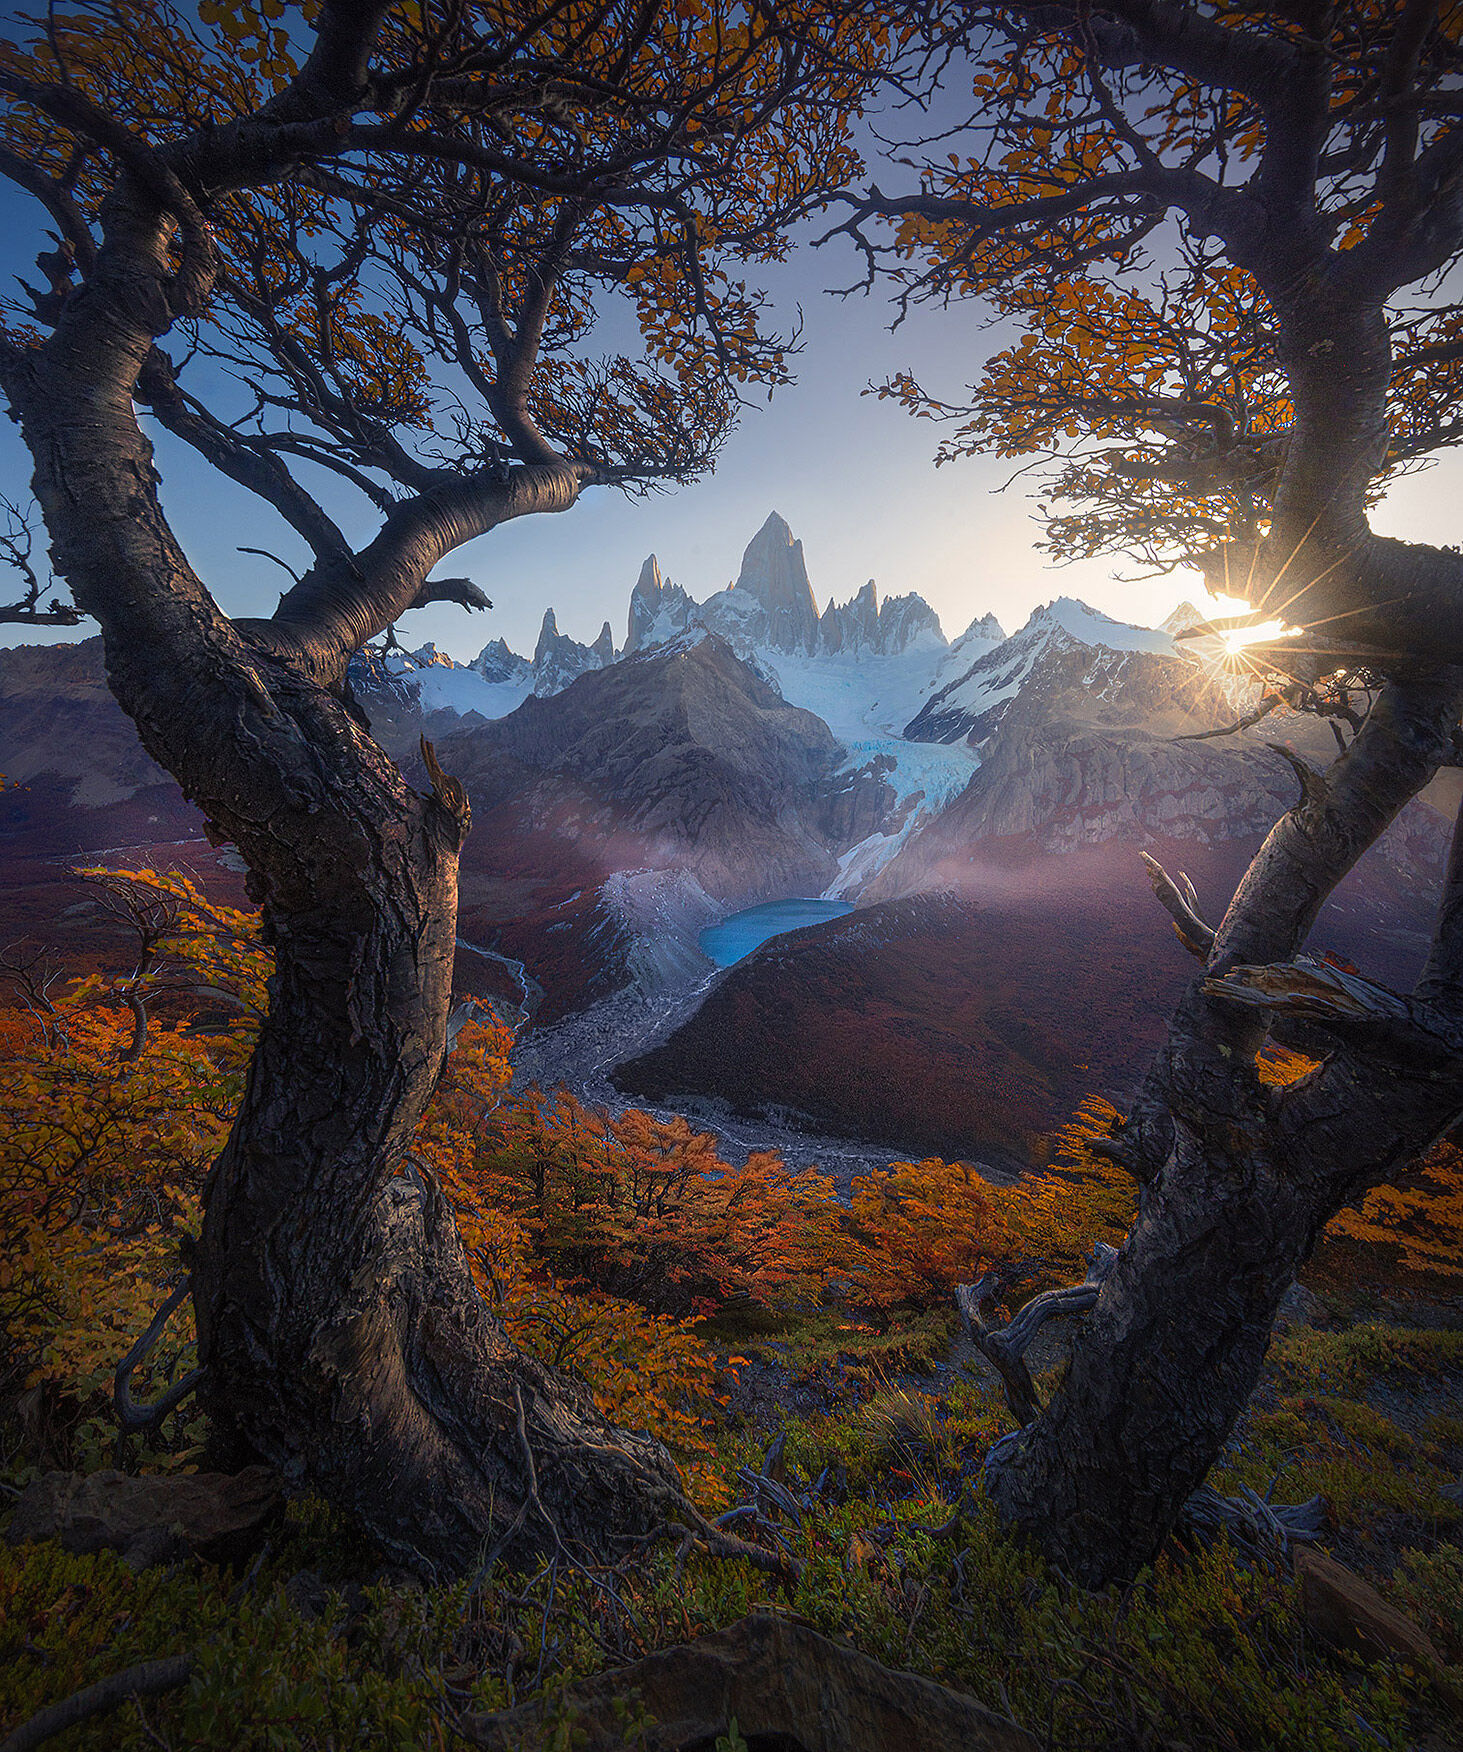 Lenga trees and fall colors surround the great mountain, Fitz Roy, in Argentina.